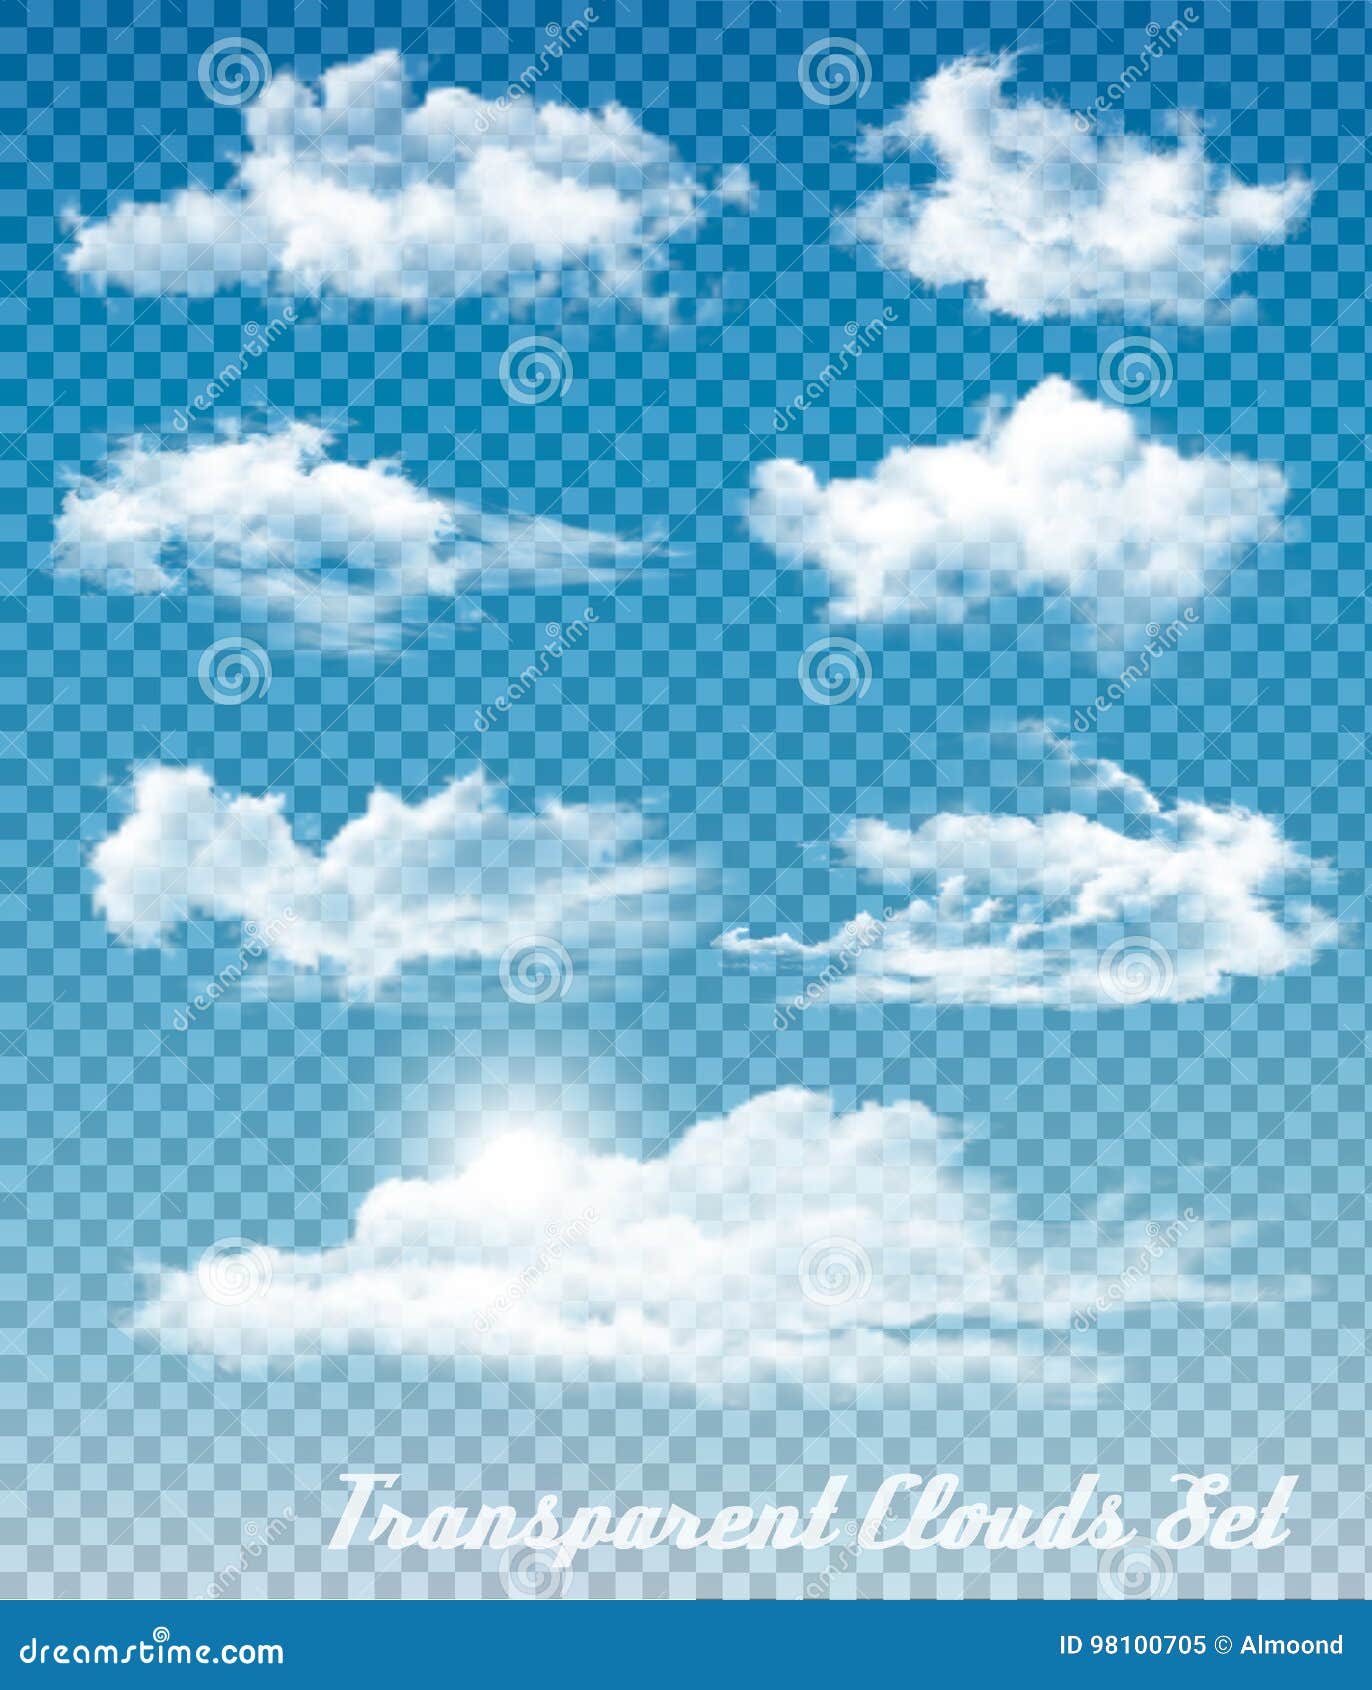 set of white clouds on a transparent sky background.